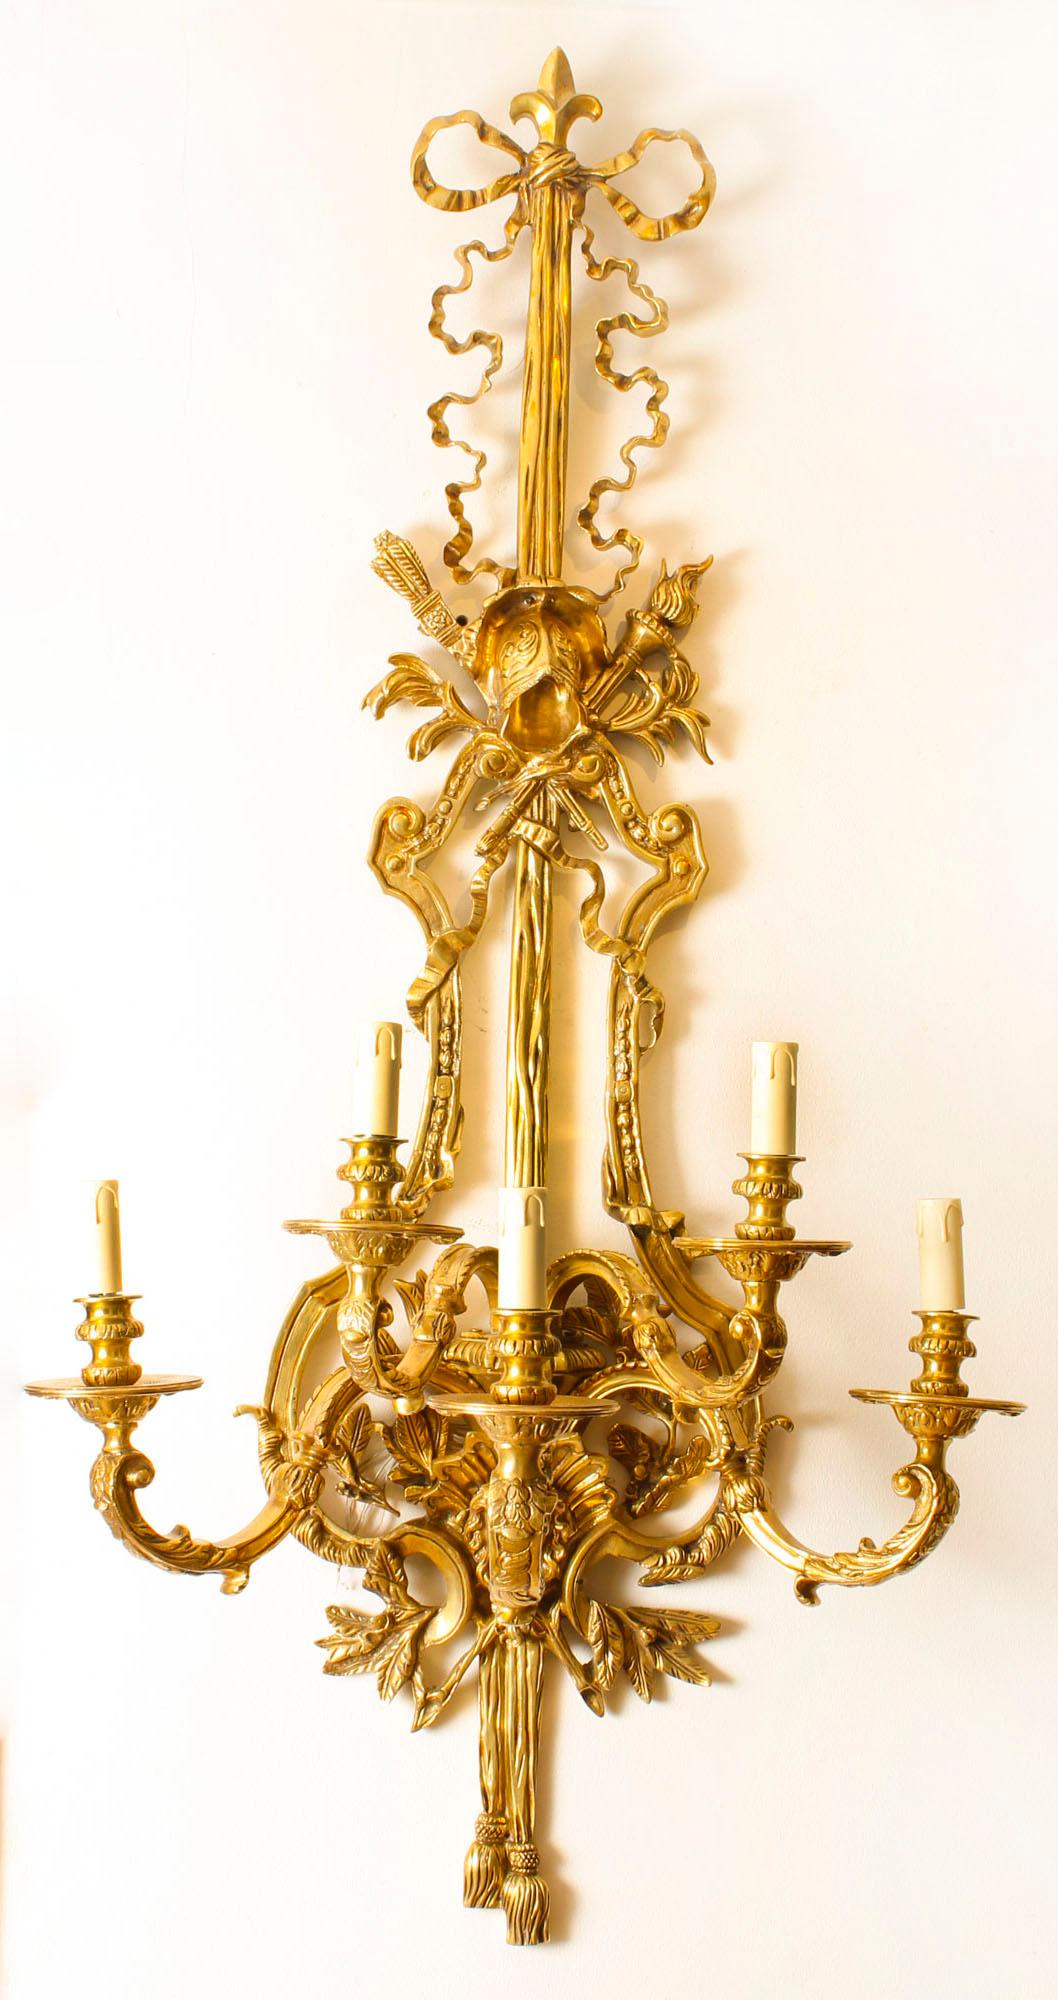 This is a stunning monumental vintage pair of French Empire Revival ormolu wall lights, dating from the late 20th century.

They are beautifully decorated with bows, ribbons, flaming torches, tassels, etc.
and each has five lights. 

The